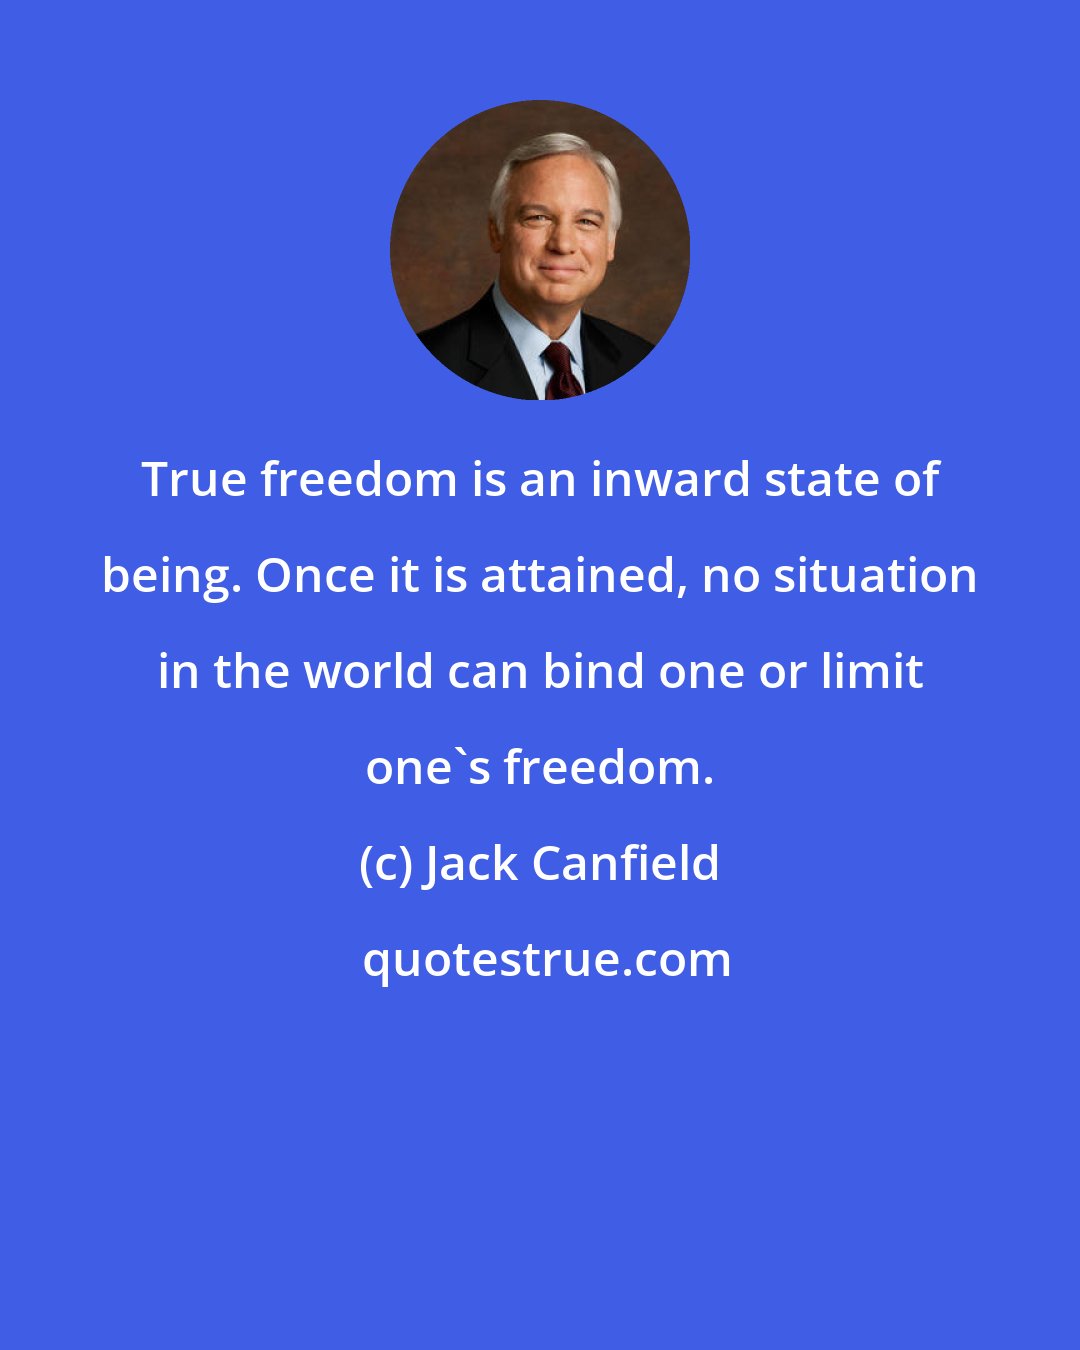 Jack Canfield: True freedom is an inward state of being. Once it is attained, no situation in the world can bind one or limit one's freedom.